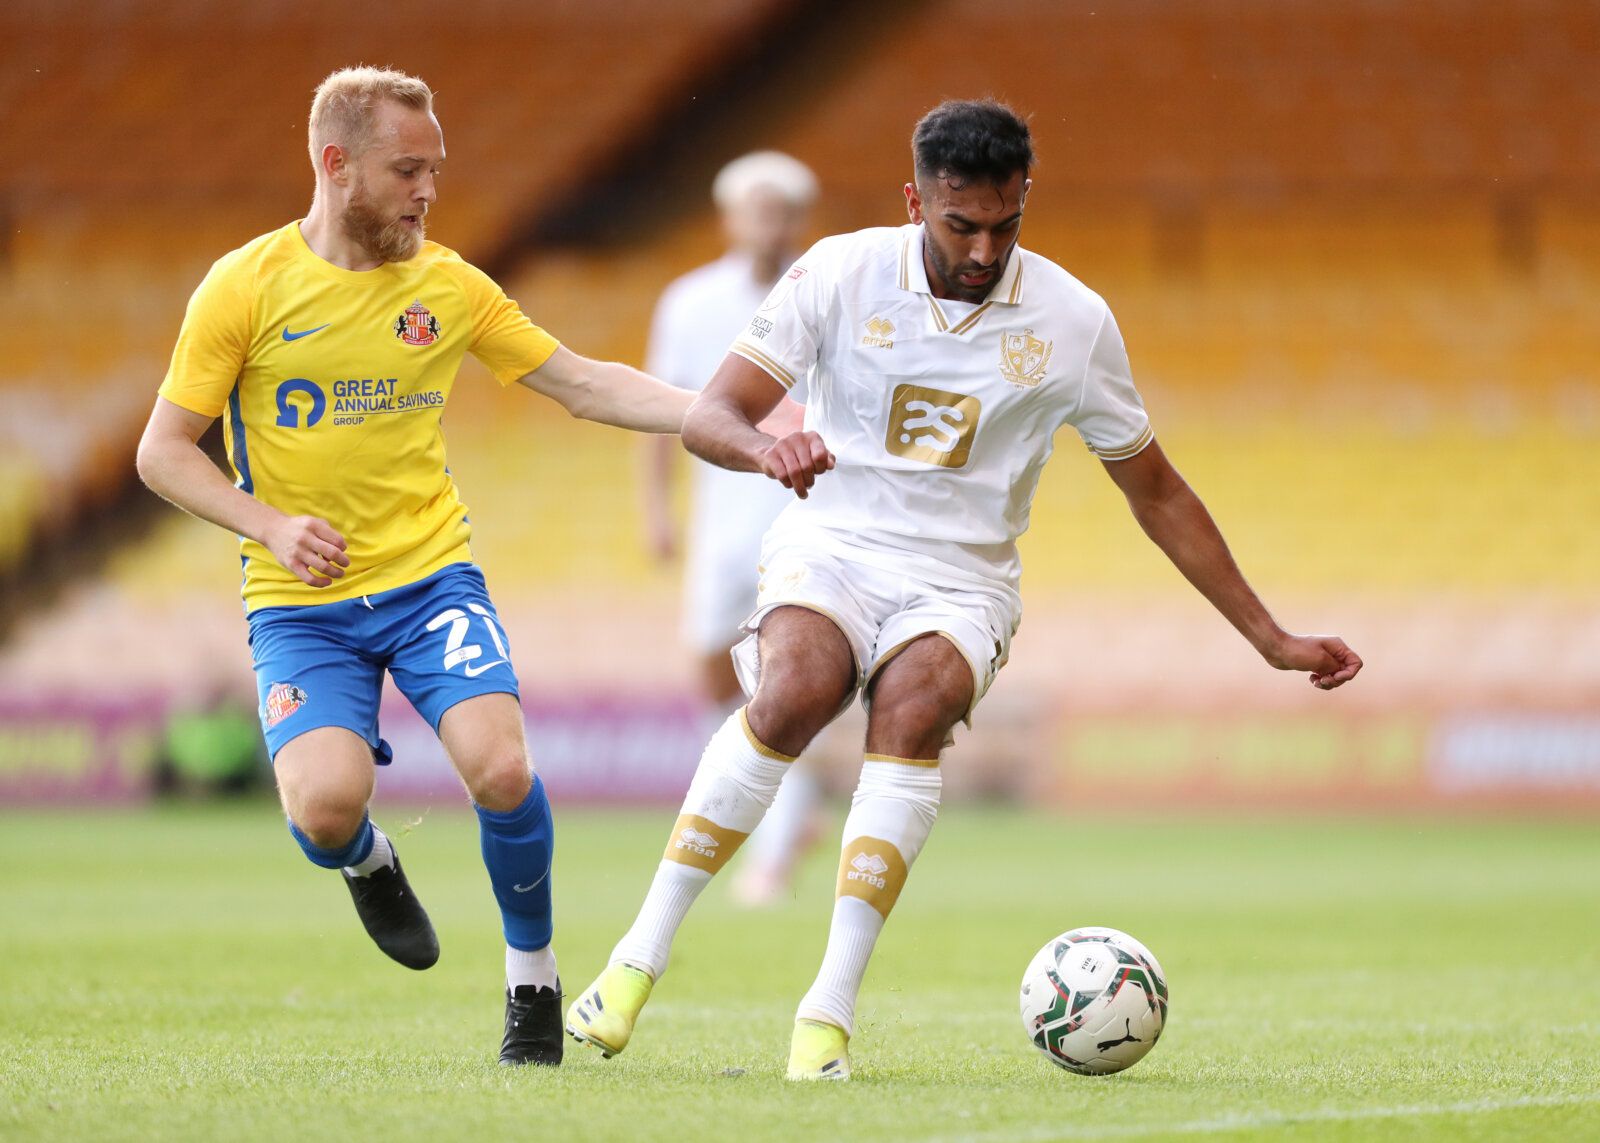 BURSLEM, ENGLAND - AUGUST 10: Malvind Benning of Port Vale battles for possession with Alex Pritchard of Sunderland during the Carabao Cup First Round match between Port Vale and Sunderland at Vale Park on August 10, 2021 in Burslem, England. (Photo by Lewis Storey/Getty Images)